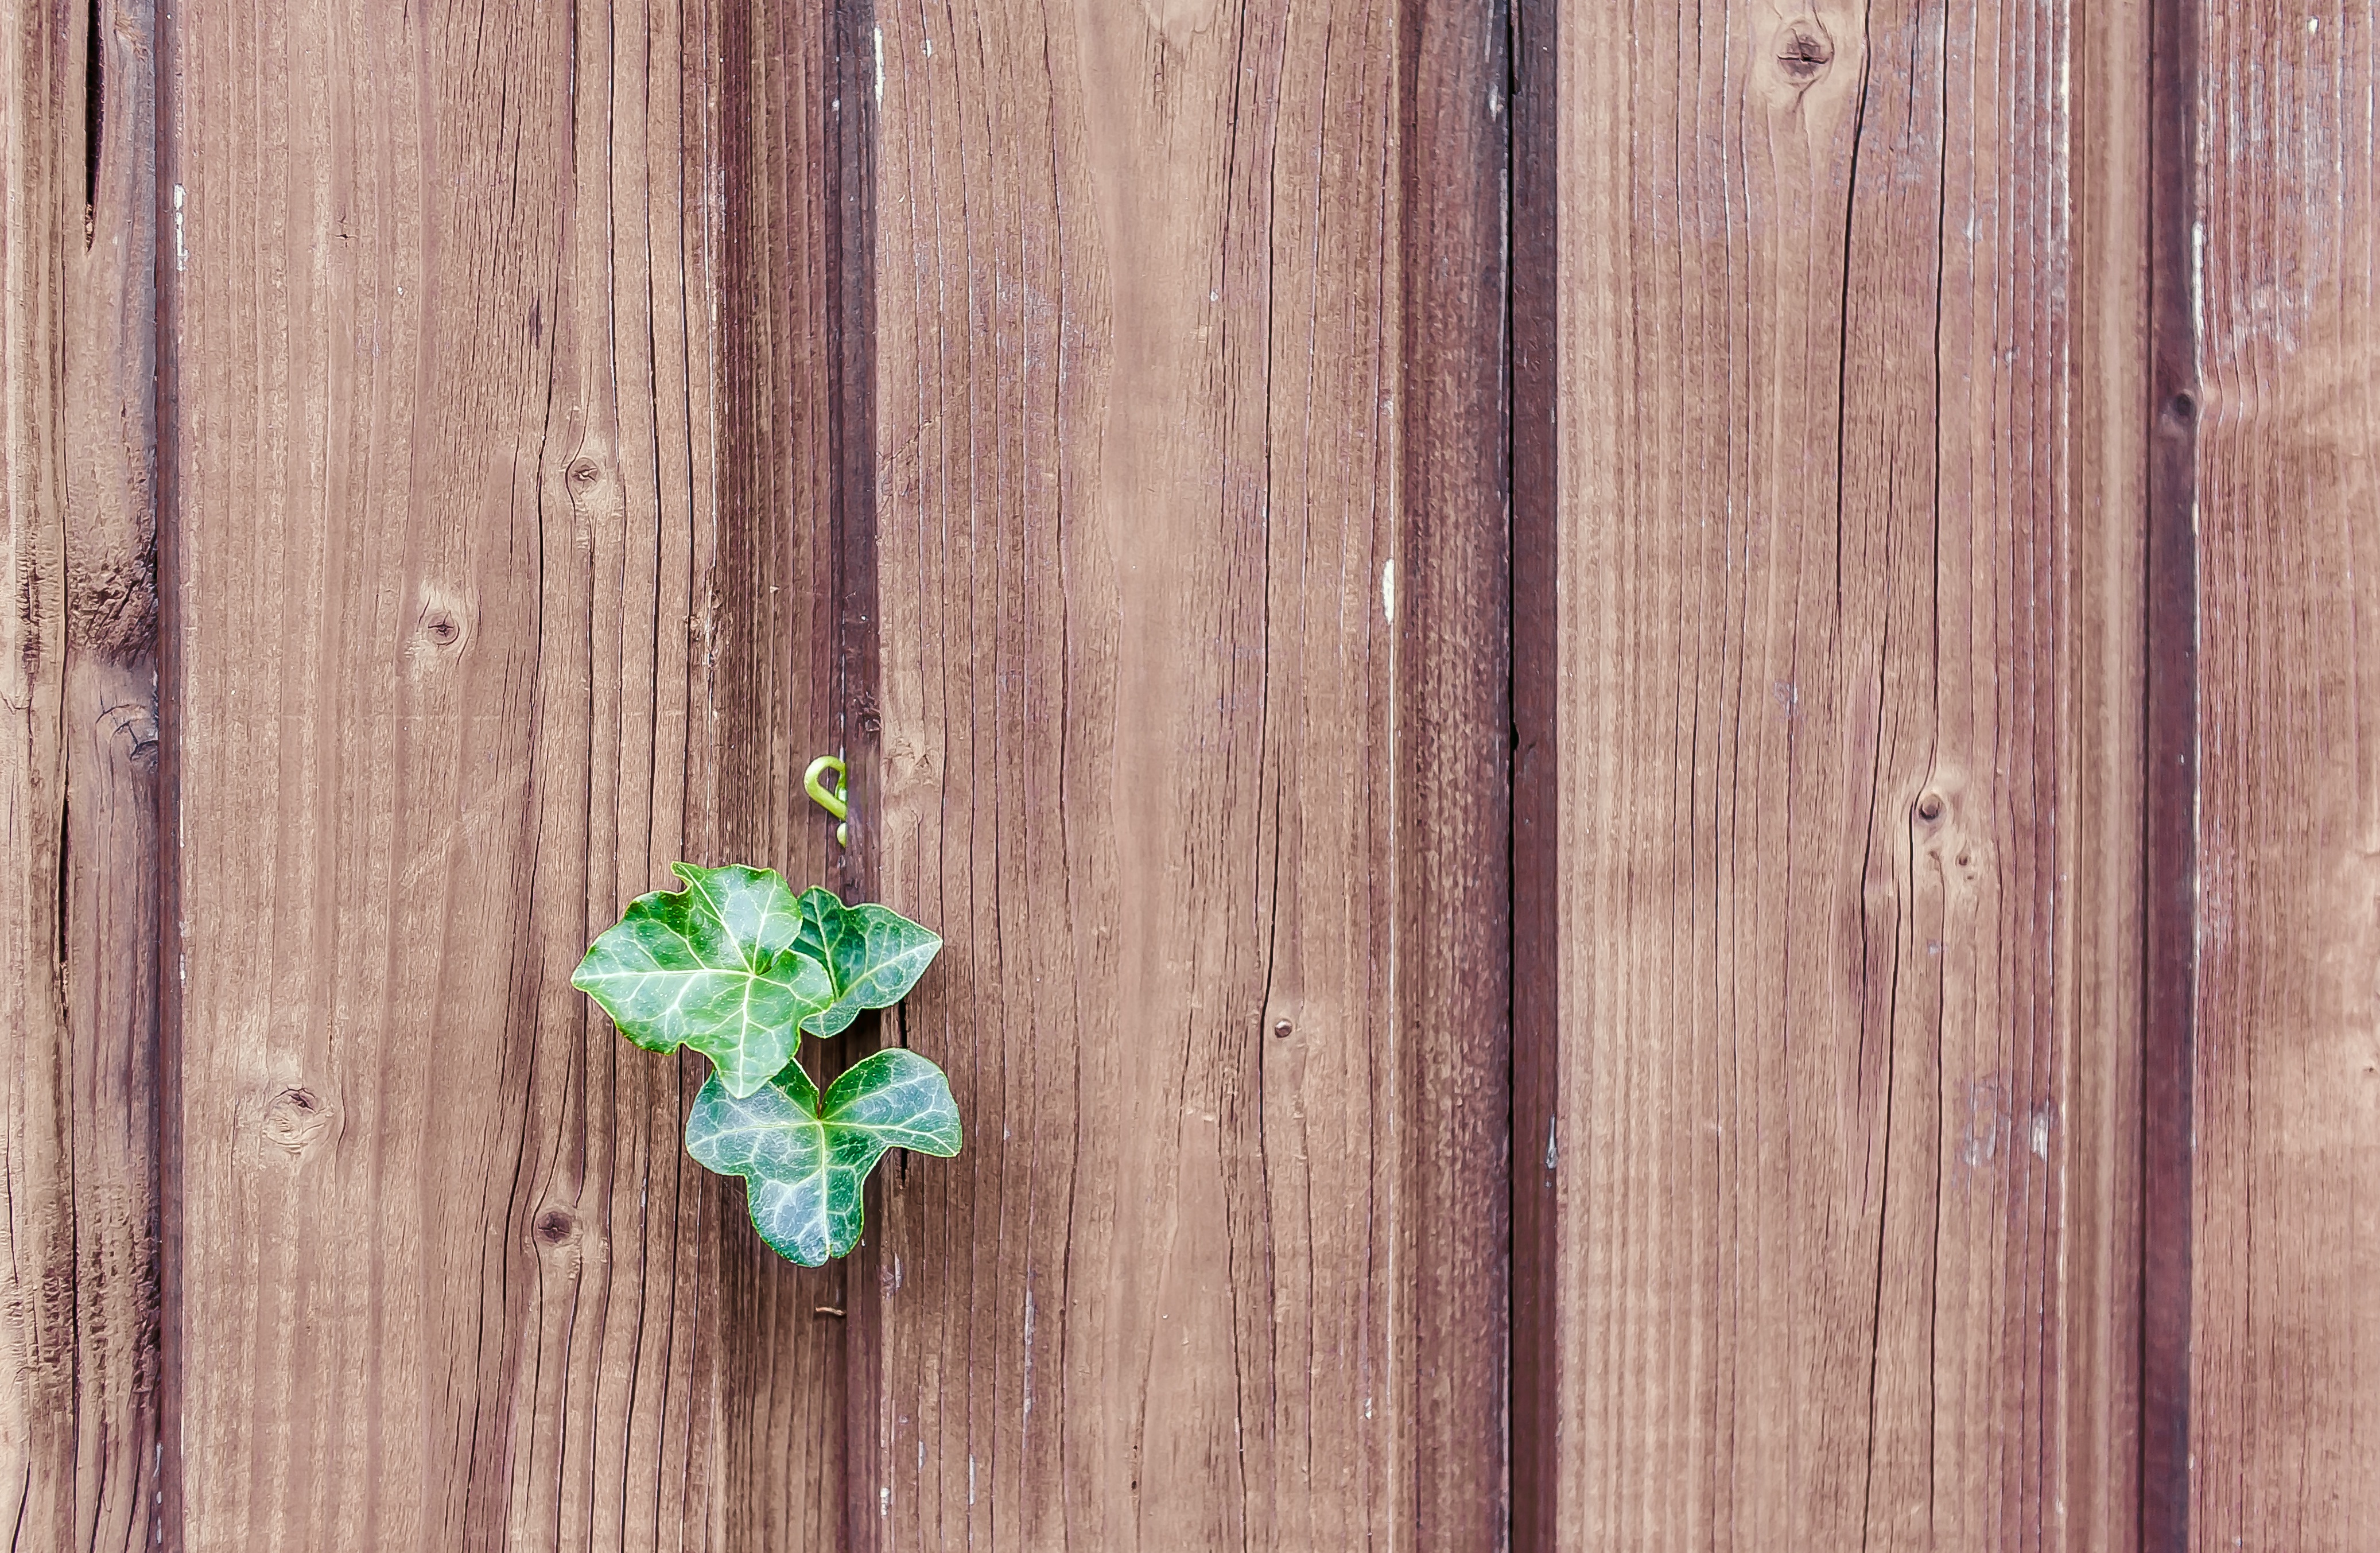 New Lock Screen Wallpapers sheet, wall, plant, miscellanea, miscellaneous, leaf, fence, planks, board